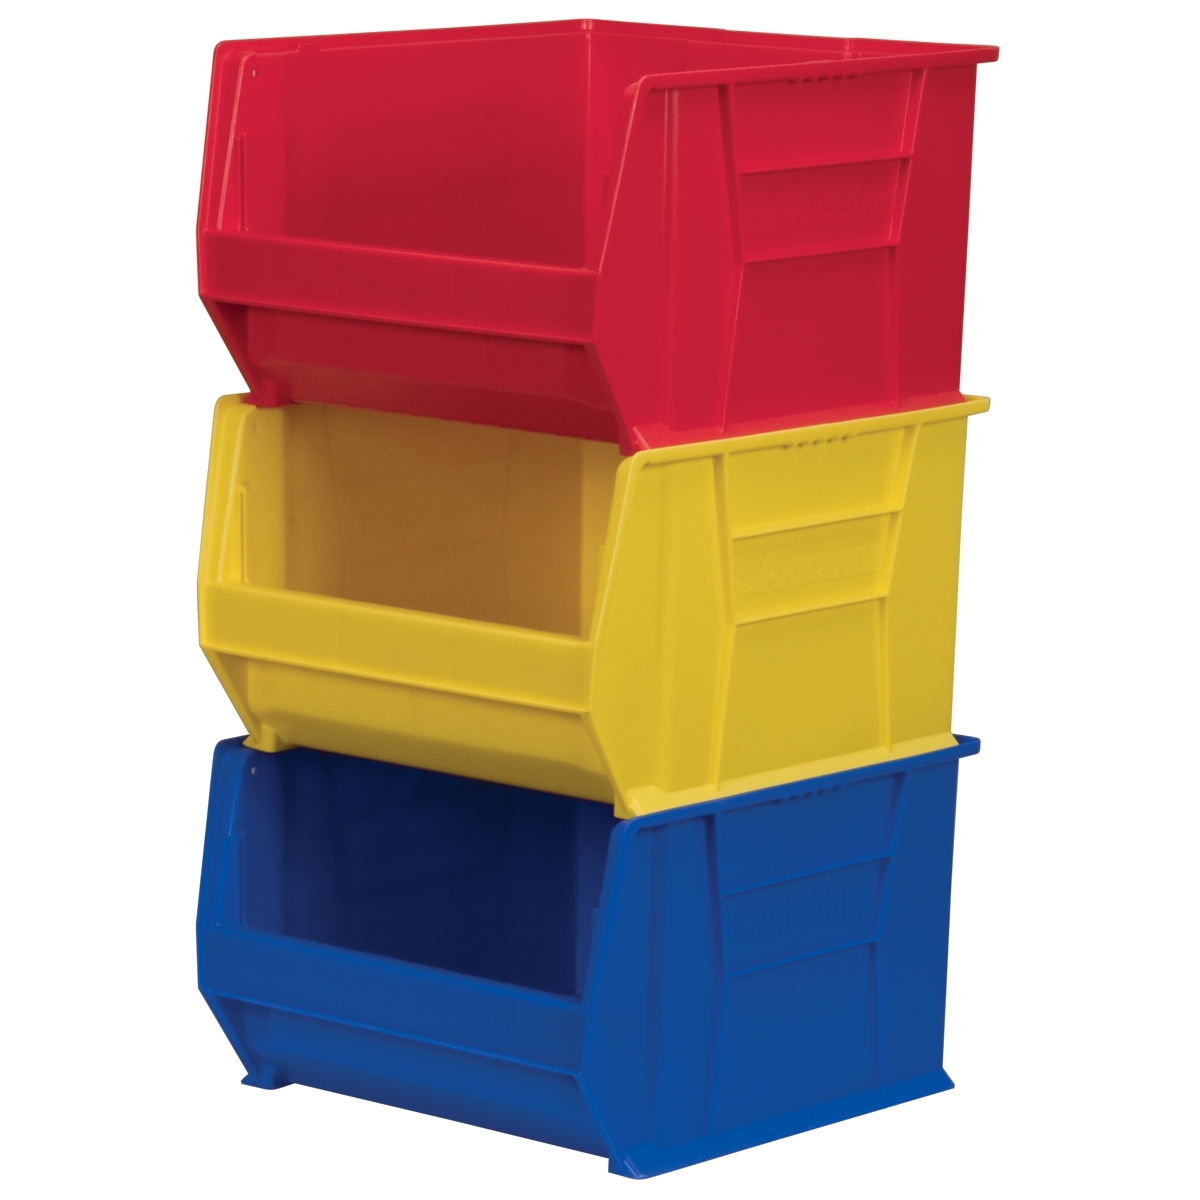 Stackable Plastic Bins For Storage